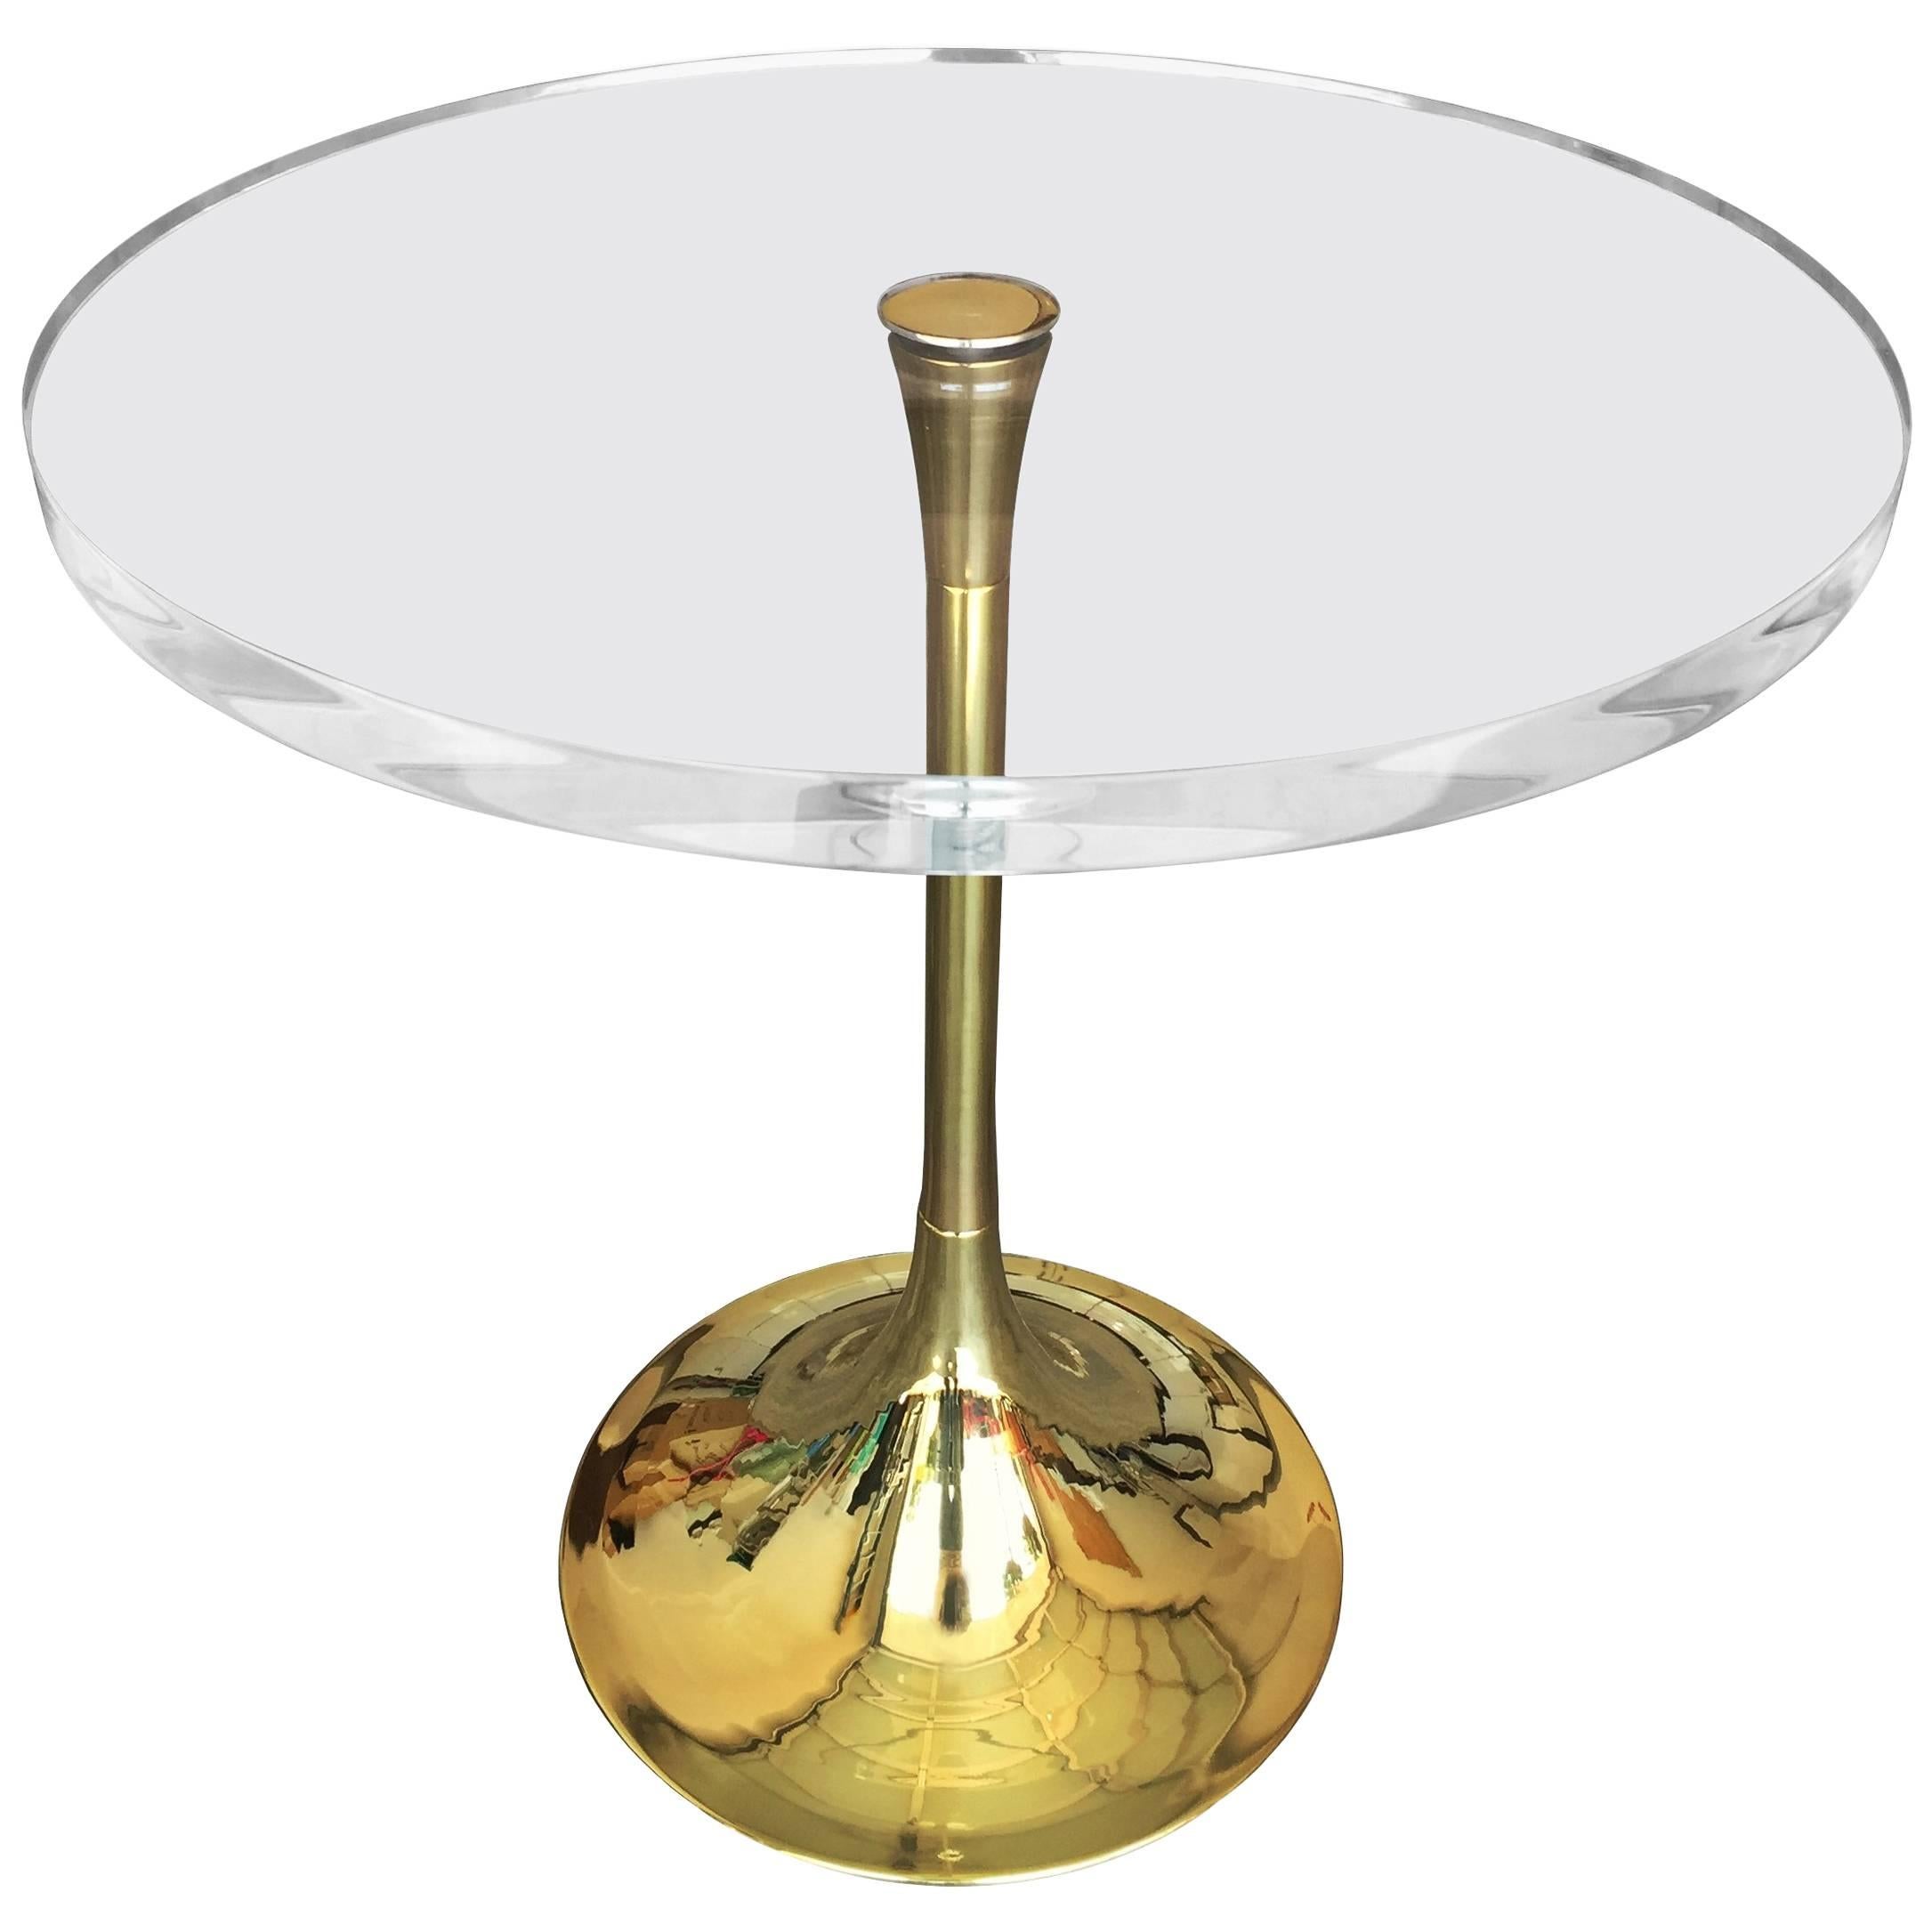 Charles Hollis Jones "Bugle" Base Side Table in Brass and Lucite